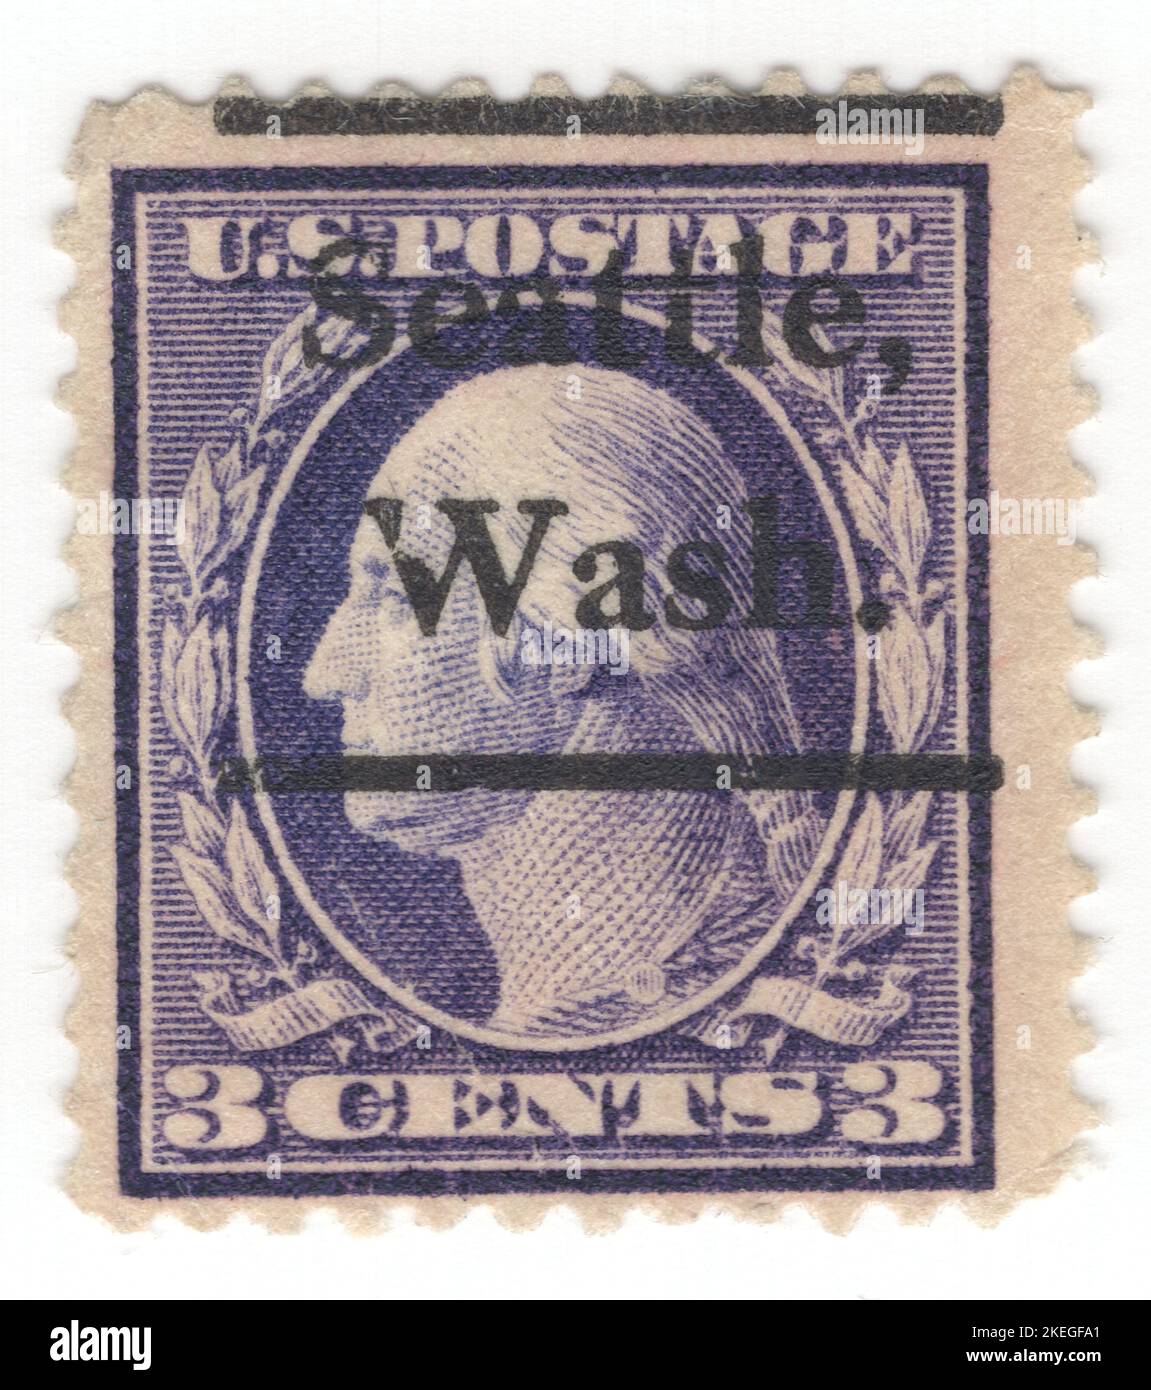 USA - 1911: An 3 cents deep violet postage stamp depicting portrait of George Washington. American military officer, statesman, and Founding Father who served as the first president of the United States from 1789 to 1797. Appointed by the Continental Congress as commander of the Continental Army, Washington led the Patriot forces to victory in the American Revolutionary War and served as the president of the Constitutional Convention of 1787, which created the Constitution of the United States and the American federal government. Washington has been called the 'Father of his Country' Stock Photo